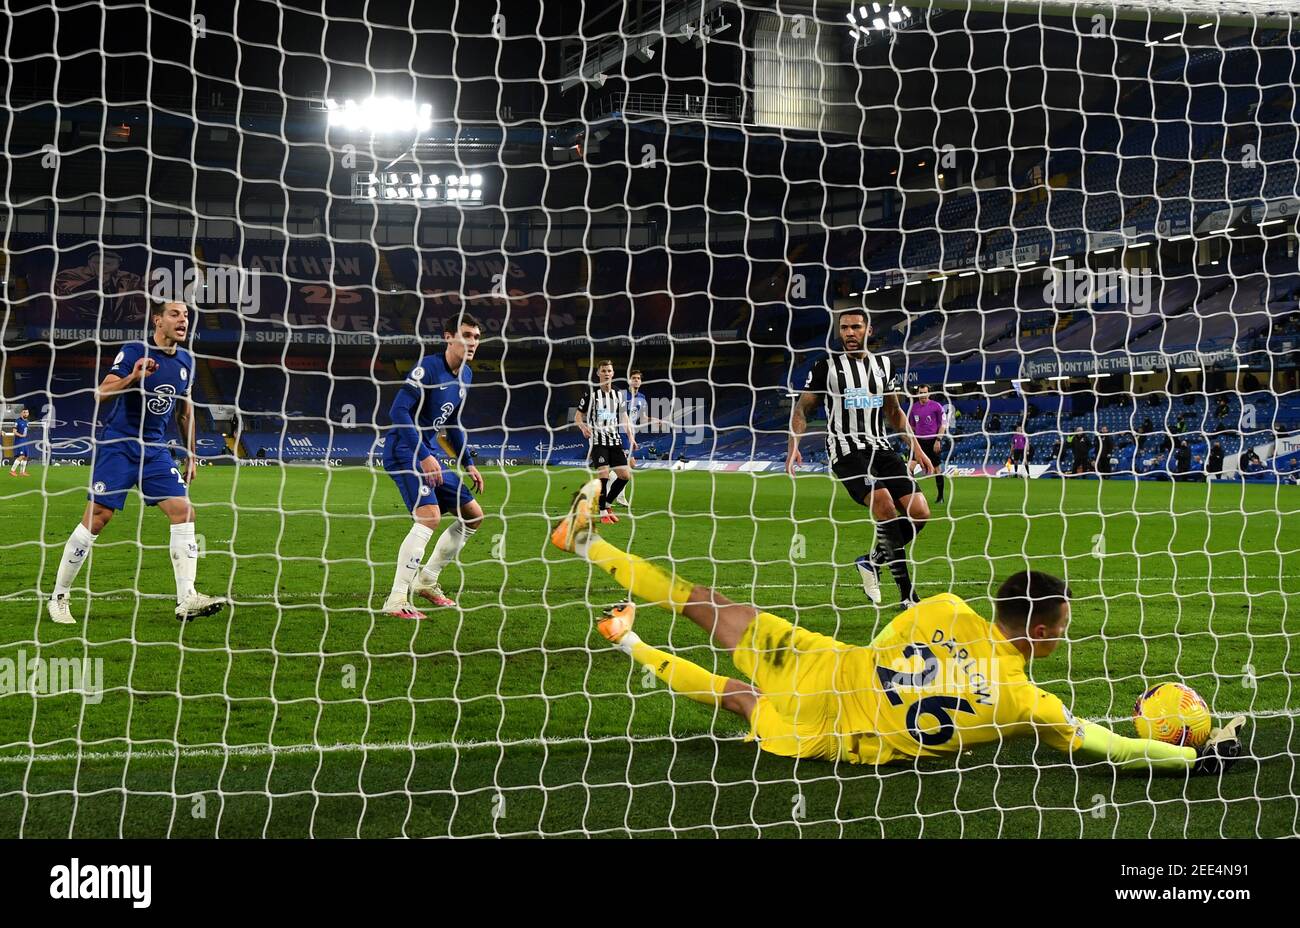 Newcastle United goalkeeper Karl Darlow concedes Chelsea's second goal of the game scored by Timo Werner (not pictured) during the Premier League match at Stamford Bridge, London. Picture date: Monday February 15, 2021. Stock Photo